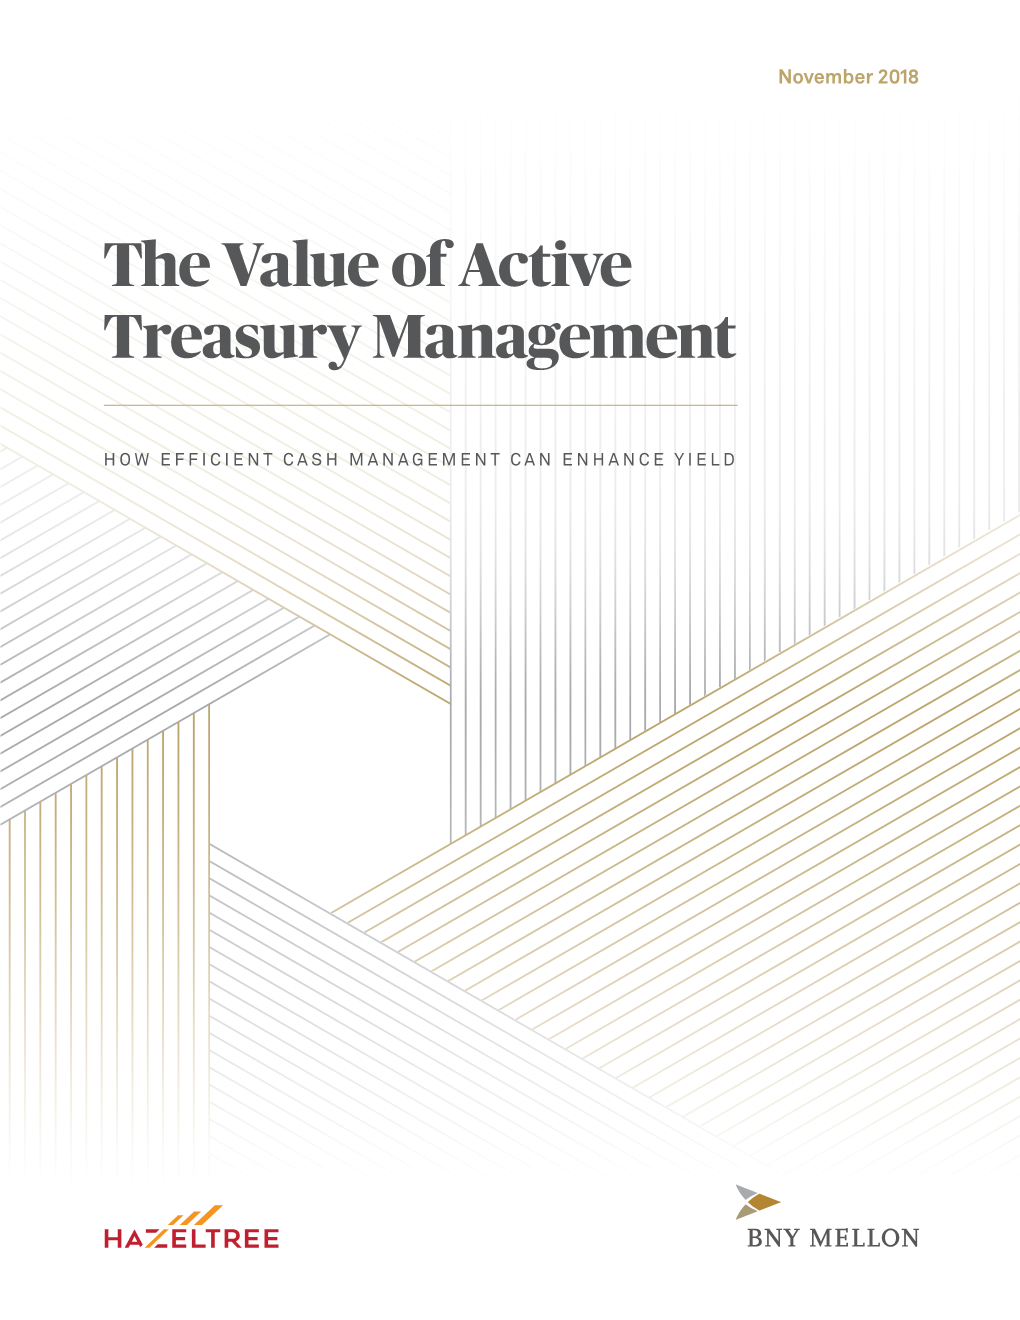 The Value of Active Treasury Management